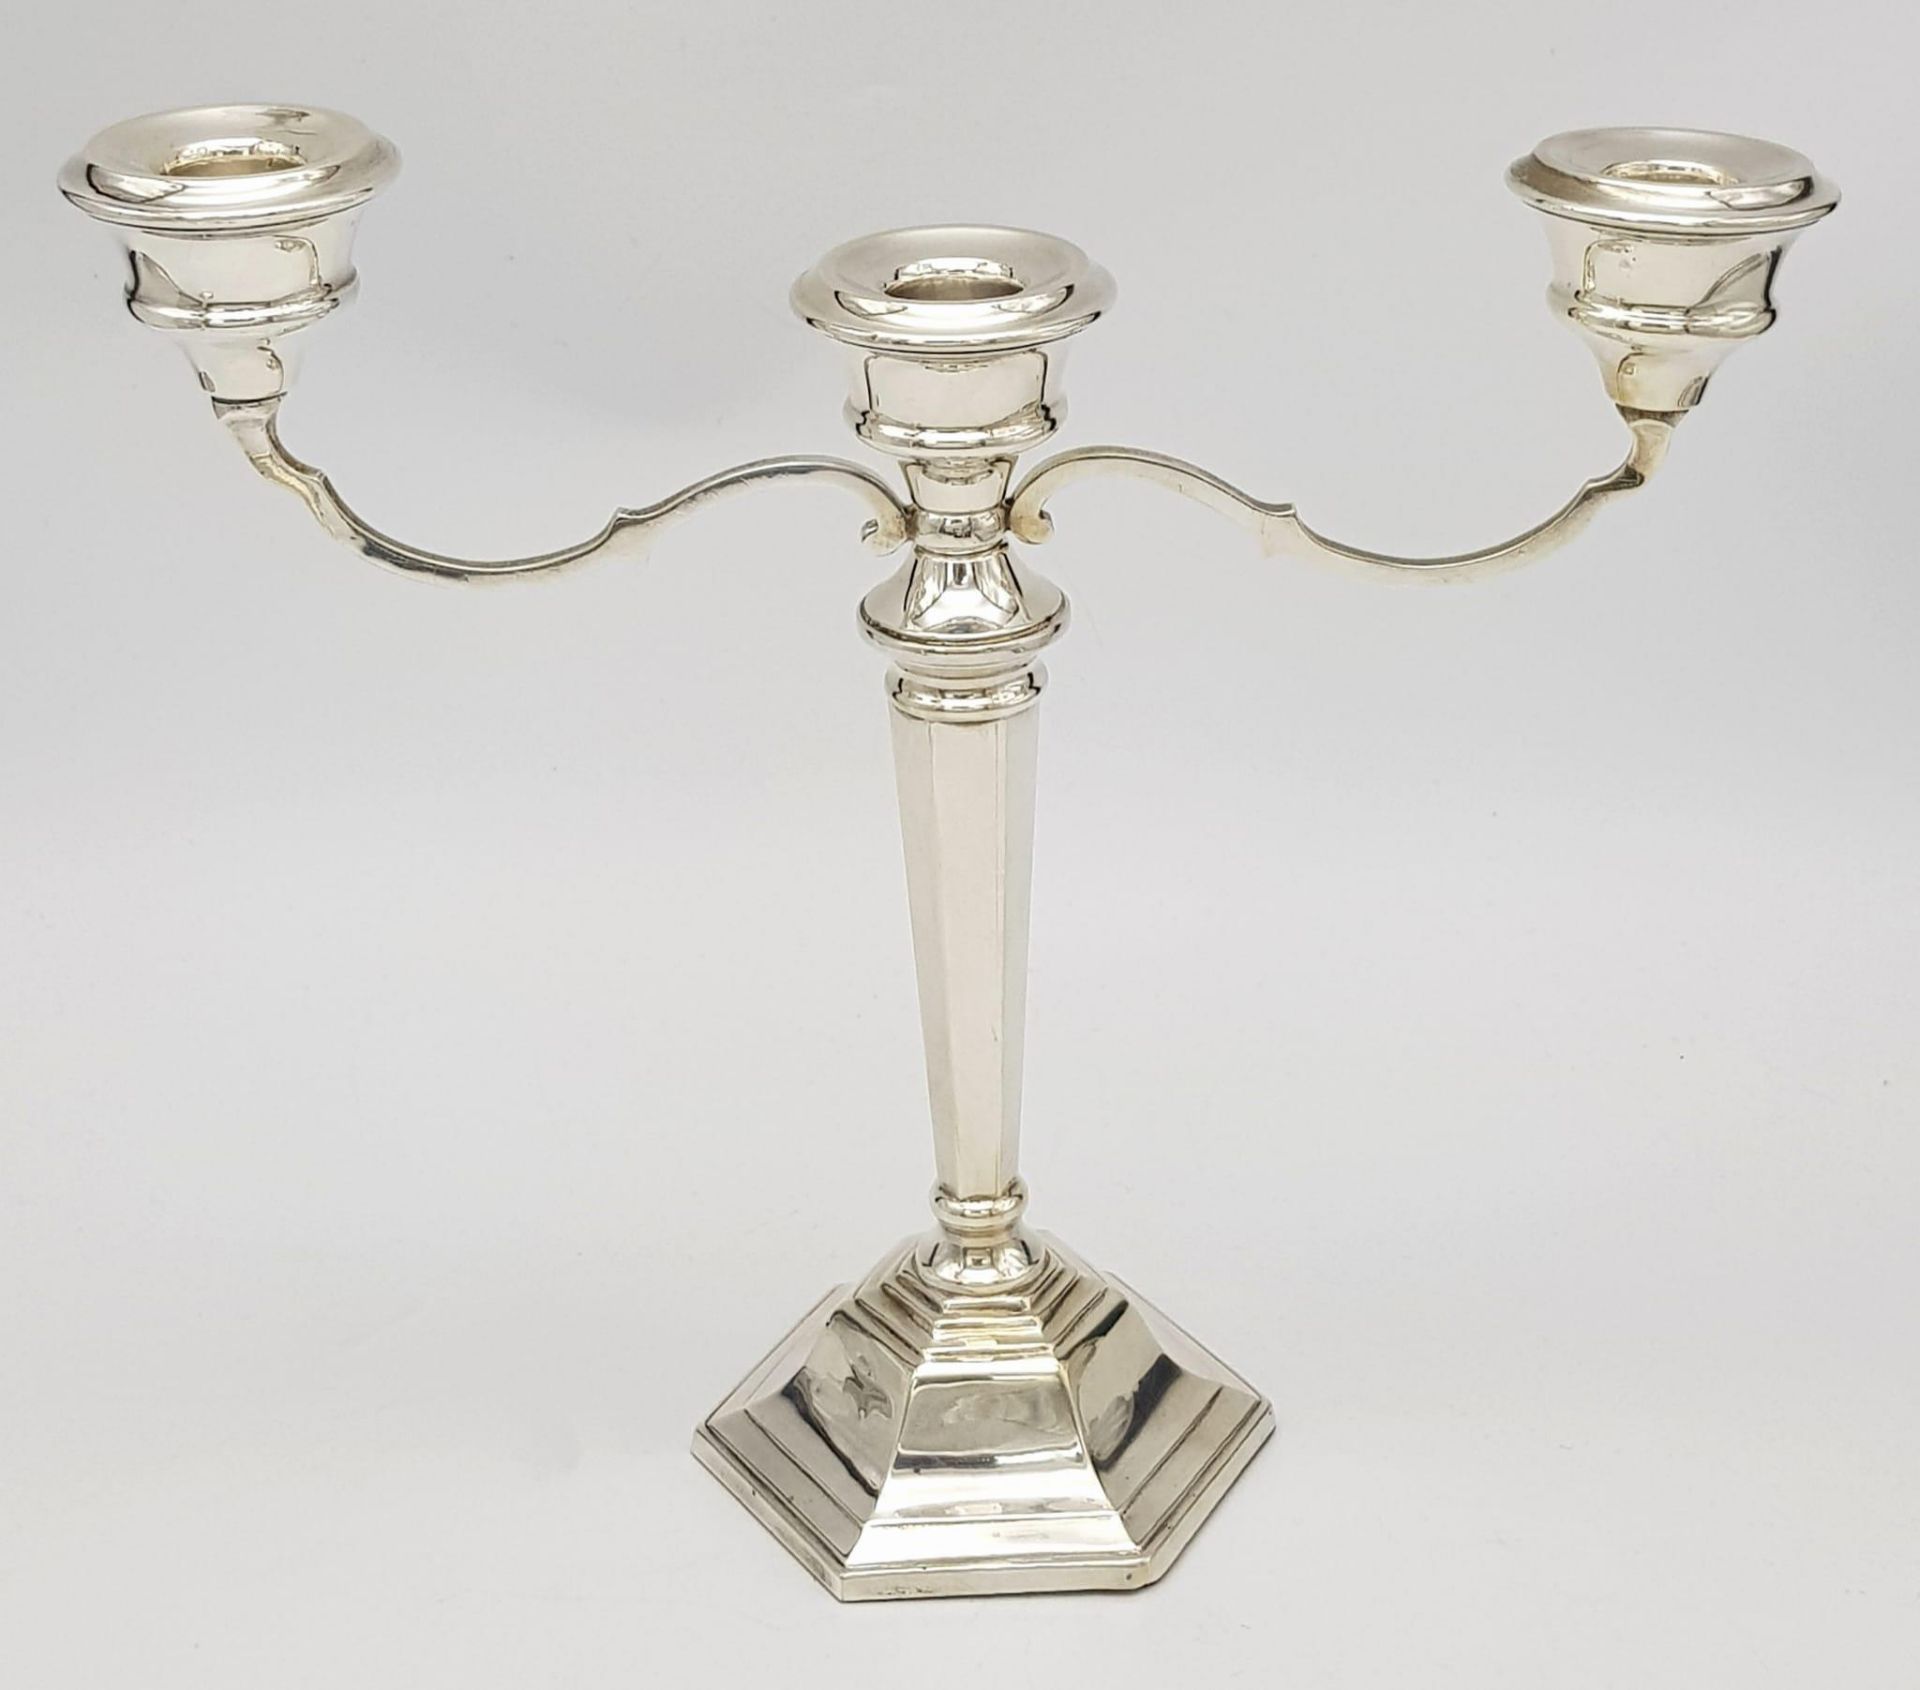 A PAIR OF SILVER CANDELABRA EACH HOLDING 3 CANDLES IN CLASSIC STYLE AND HALLMARKED IN BIRMINGHAM - Image 4 of 6